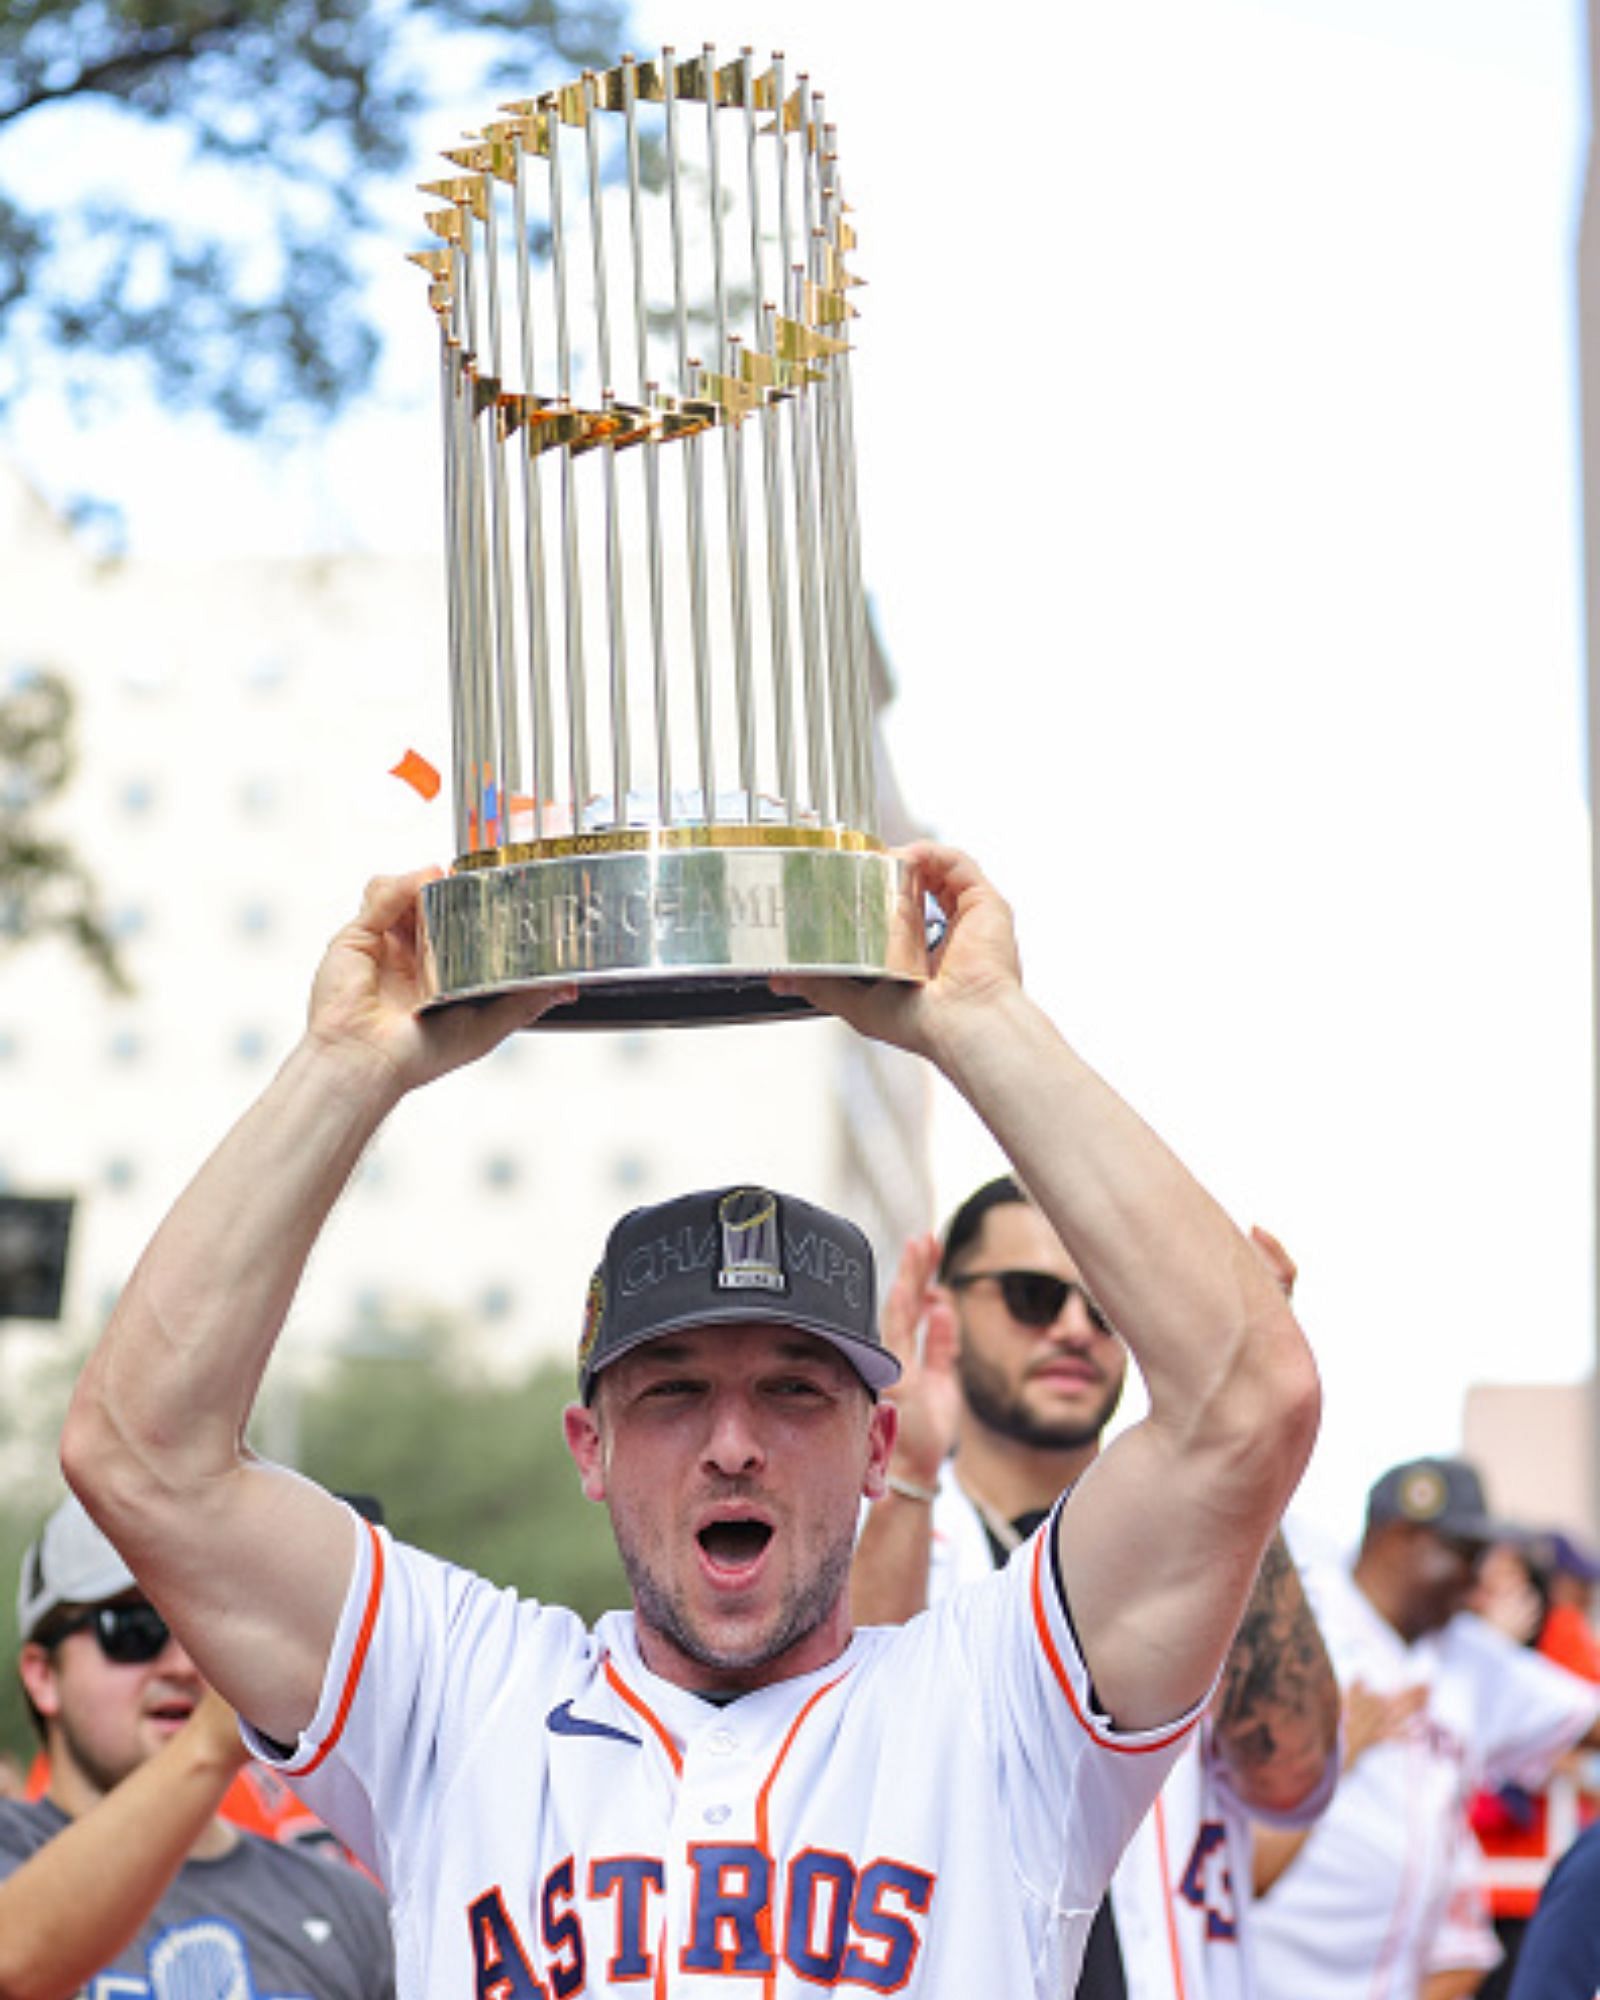 Alex Bregman participated in the 2022 World Series Parade of the Astros